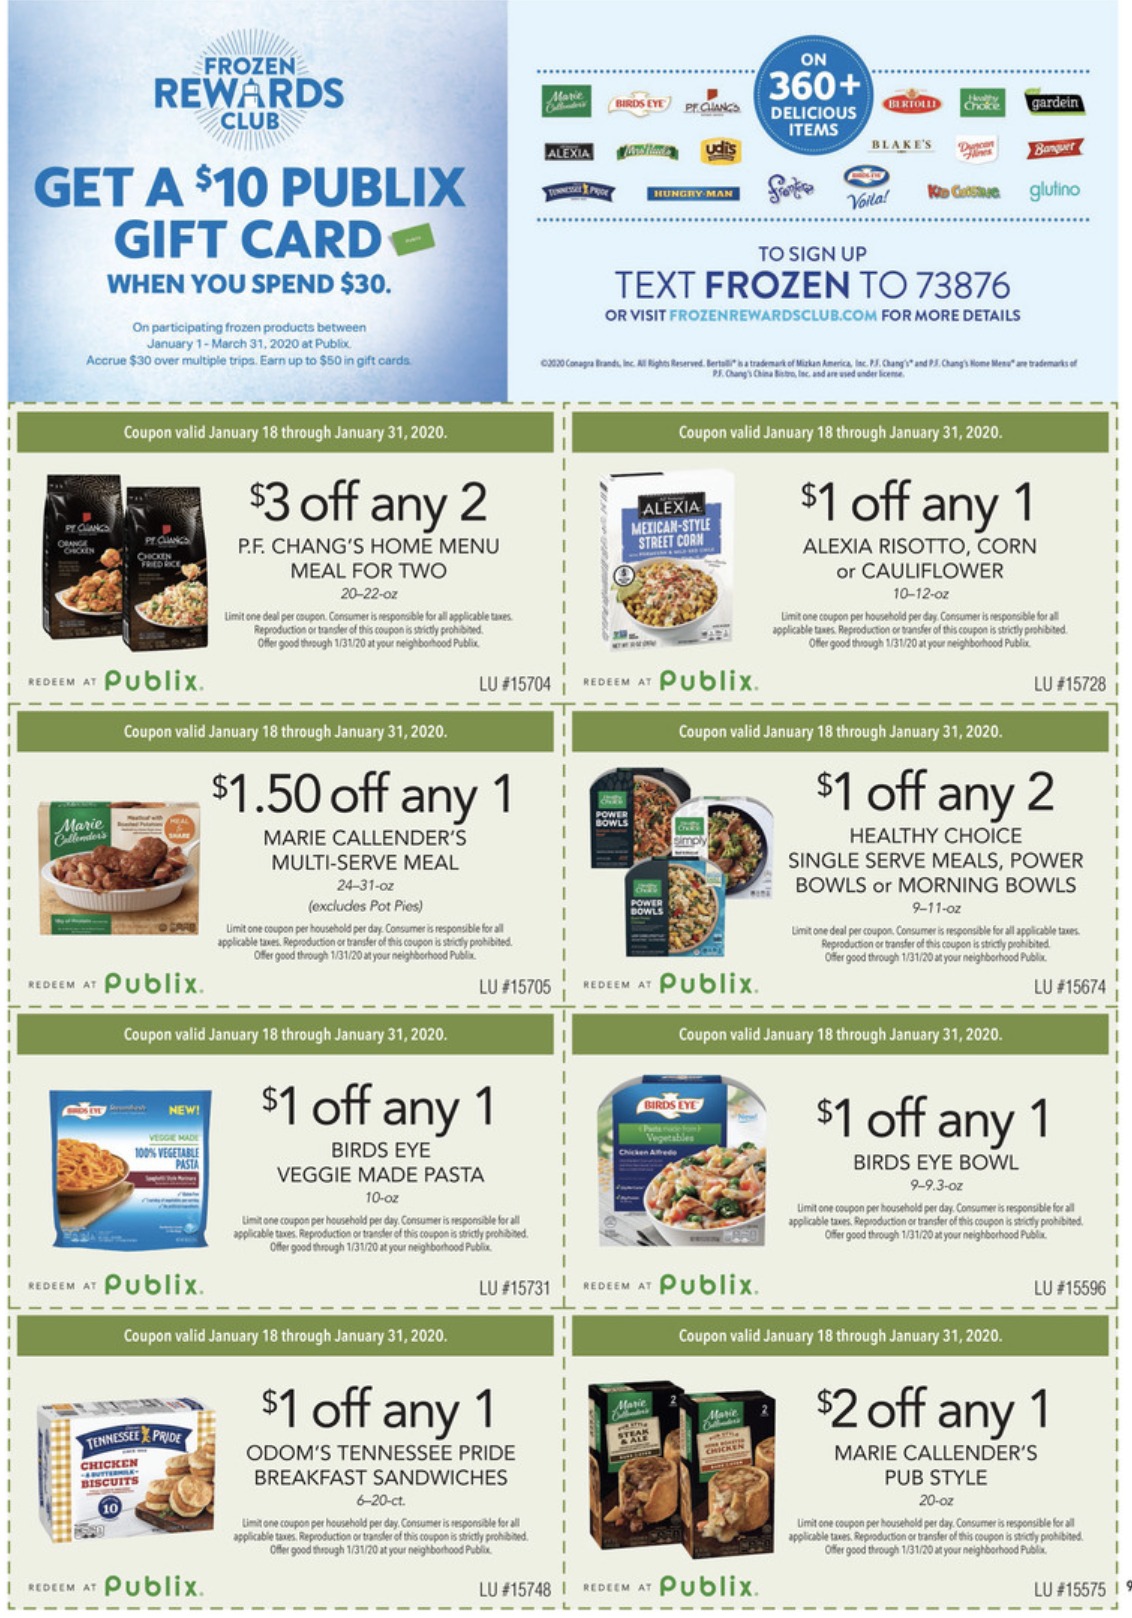 Join Now...It’s Time To Earn - Get a $10 Publix Gift Card When You Spend $30 With The Frozen Rewards Club on I Heart Publix